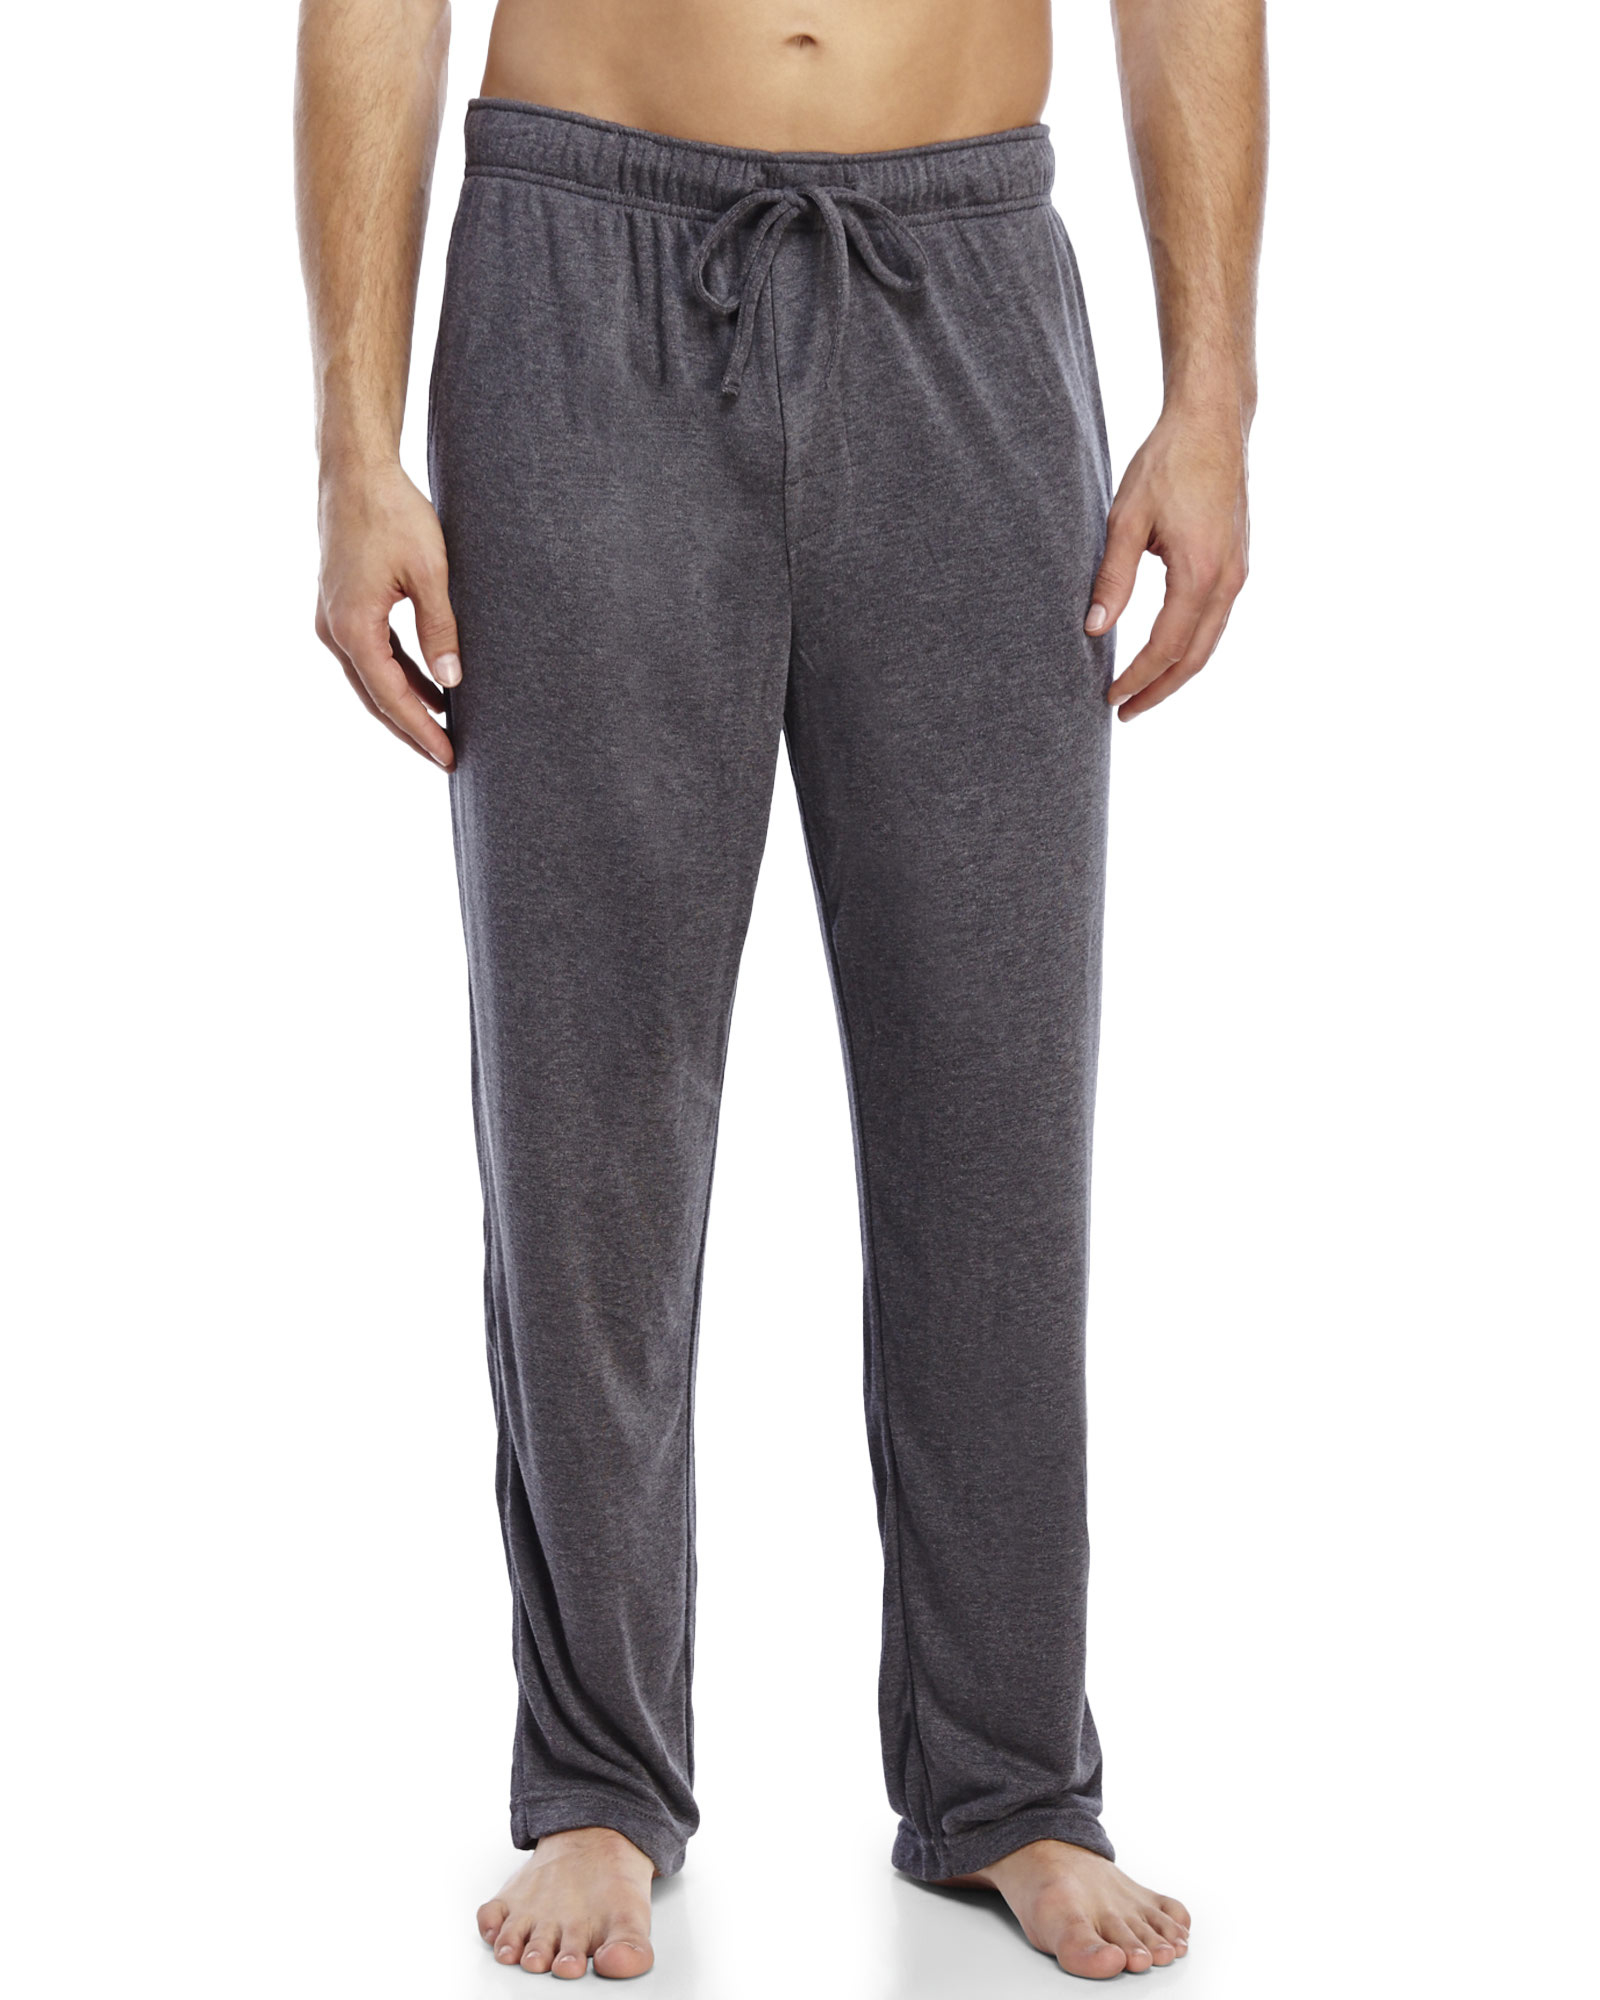 Lyst - Weatherproof 32 Degrees Heat Brushed Lounge Pants in Gray for Men